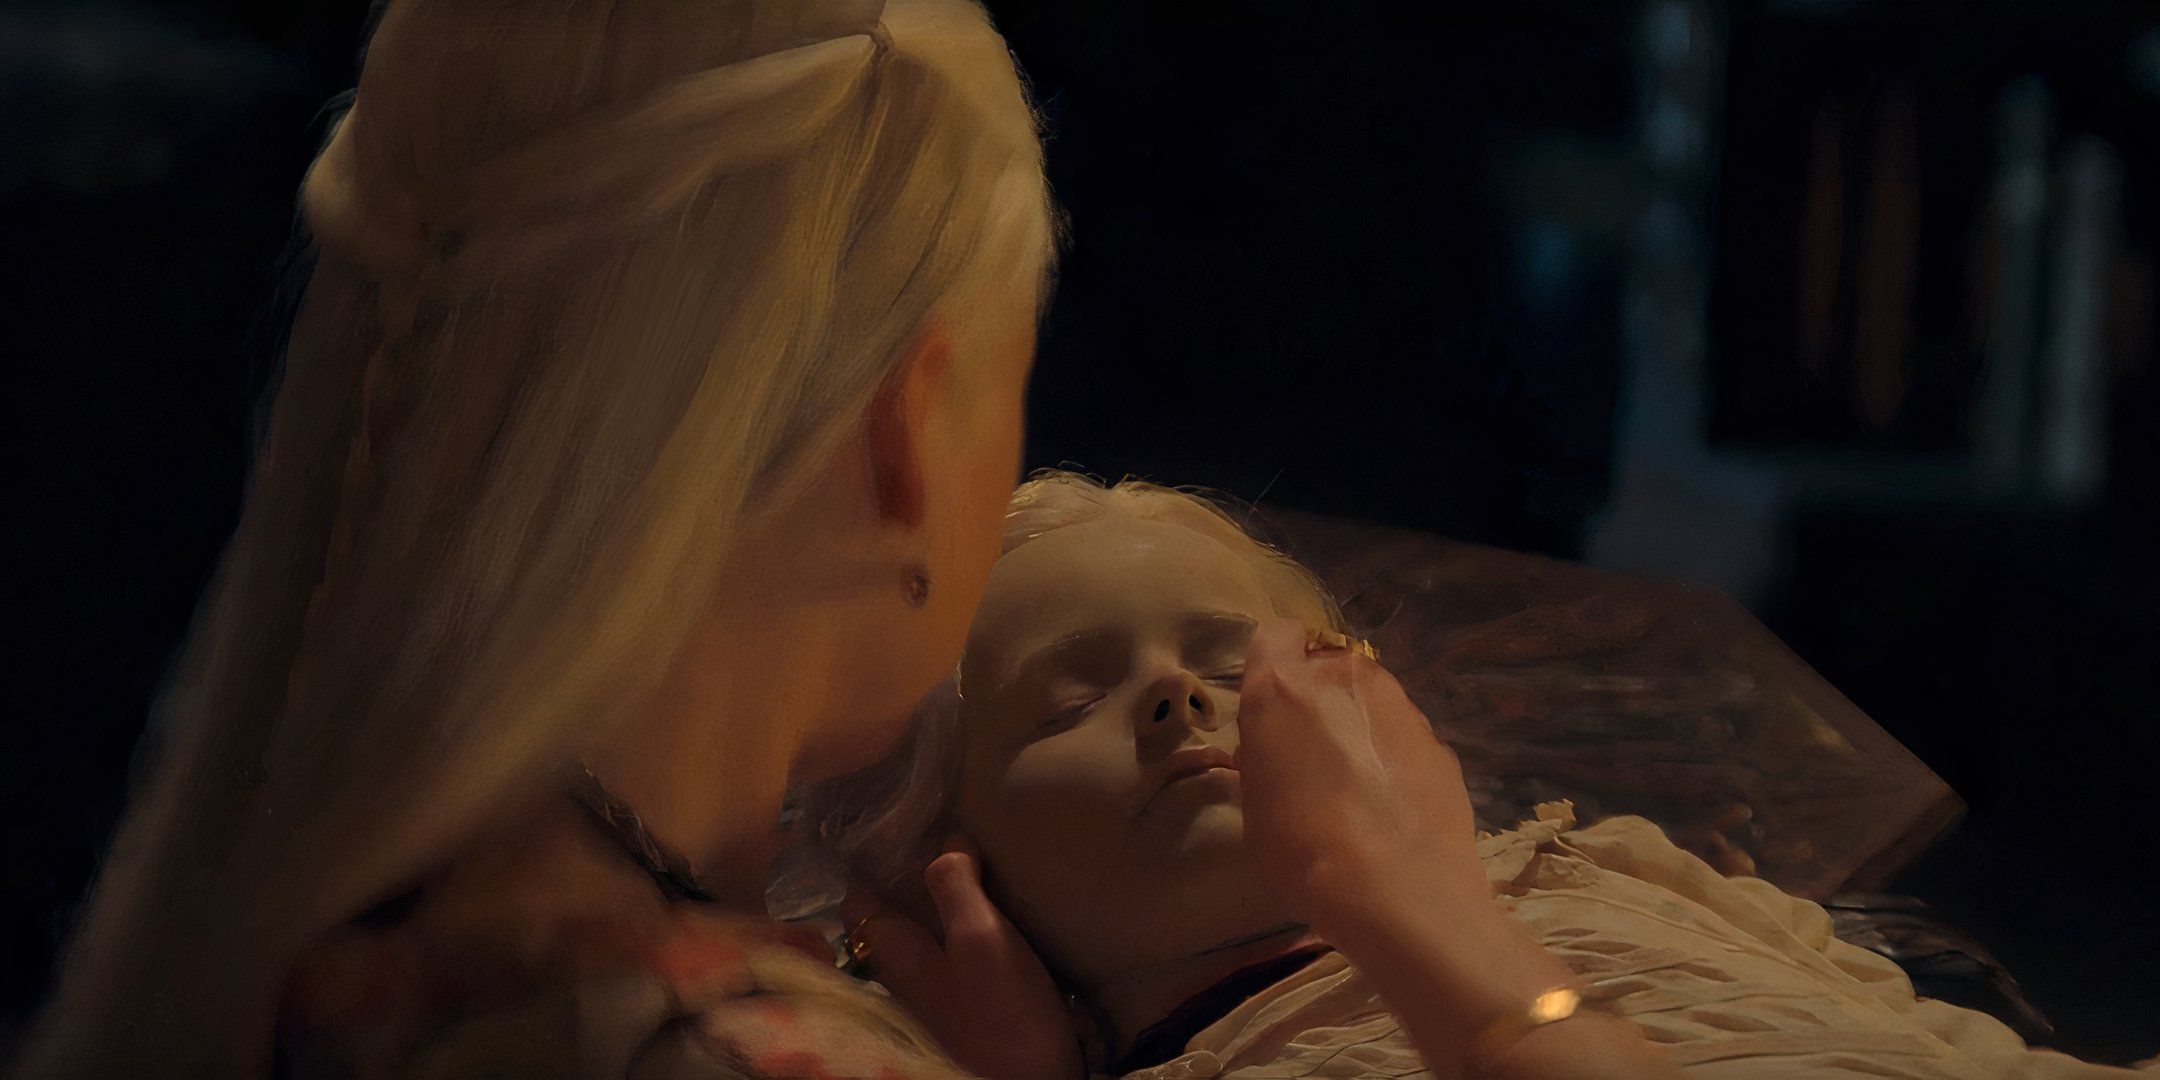 Prince Jaehaerys' head being sewn on by Milly Alcock's Rhaenyra in House of the Dragon season 2, episode 3